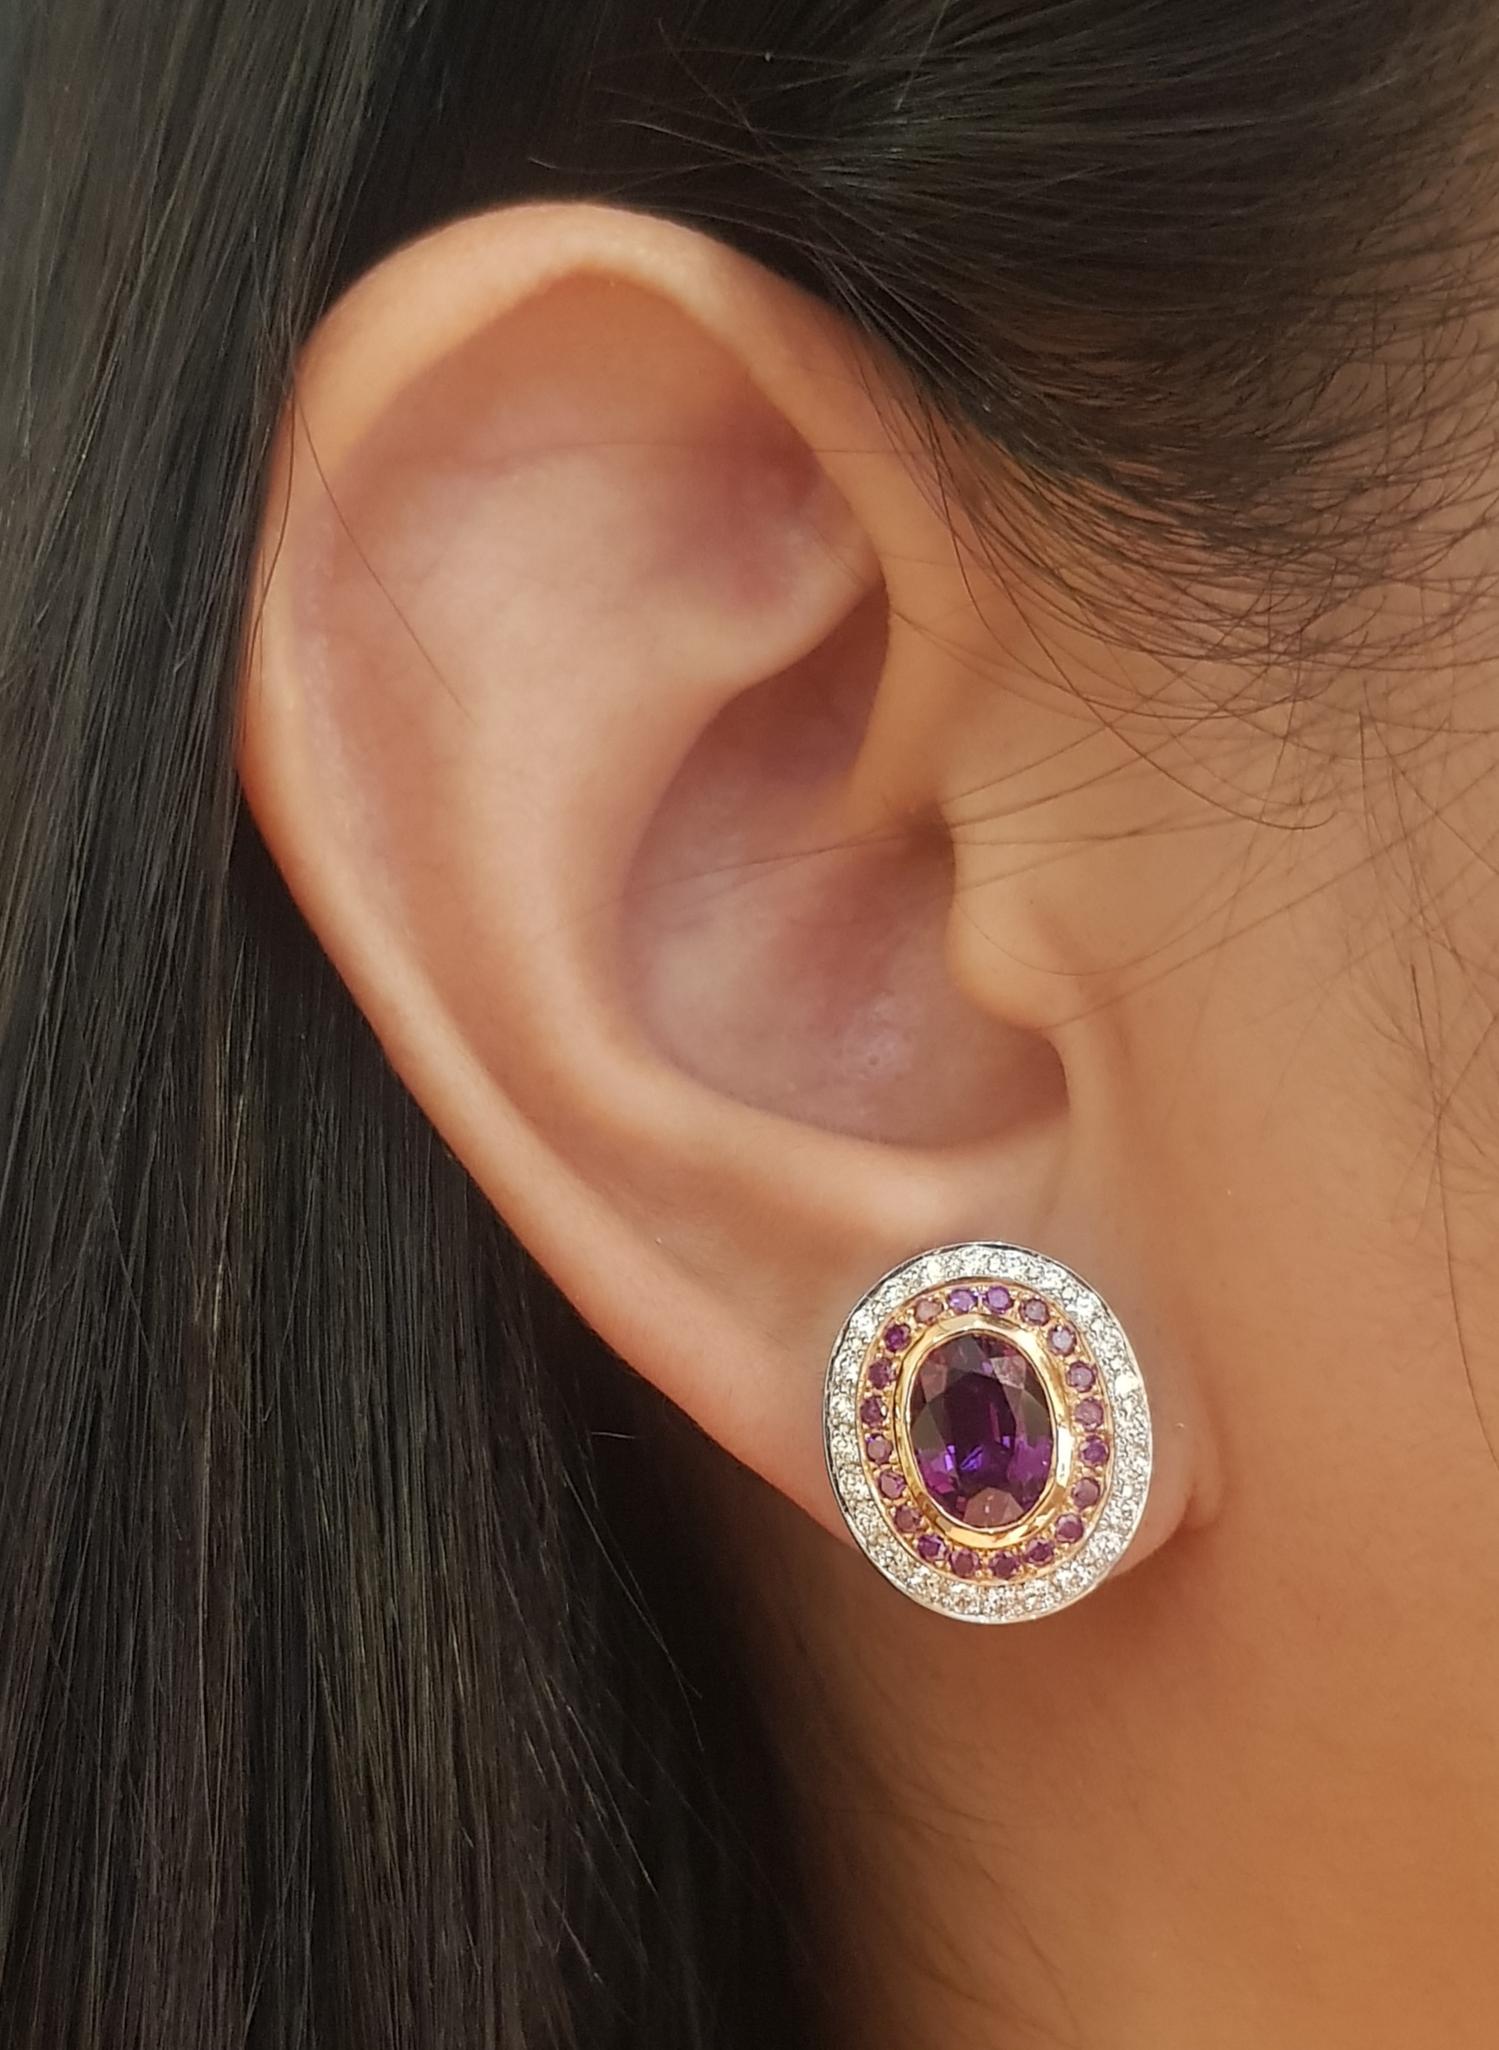 Purple Sapphire 3.69 carats with Purple Sapphire 0.46 carat and Diamond 0.49 carat Earrings set in 18K White/Rose Gold Settings

Width: 1.3 cm 
Length: 1.5 cm
Total Weight: 8.05 grams

